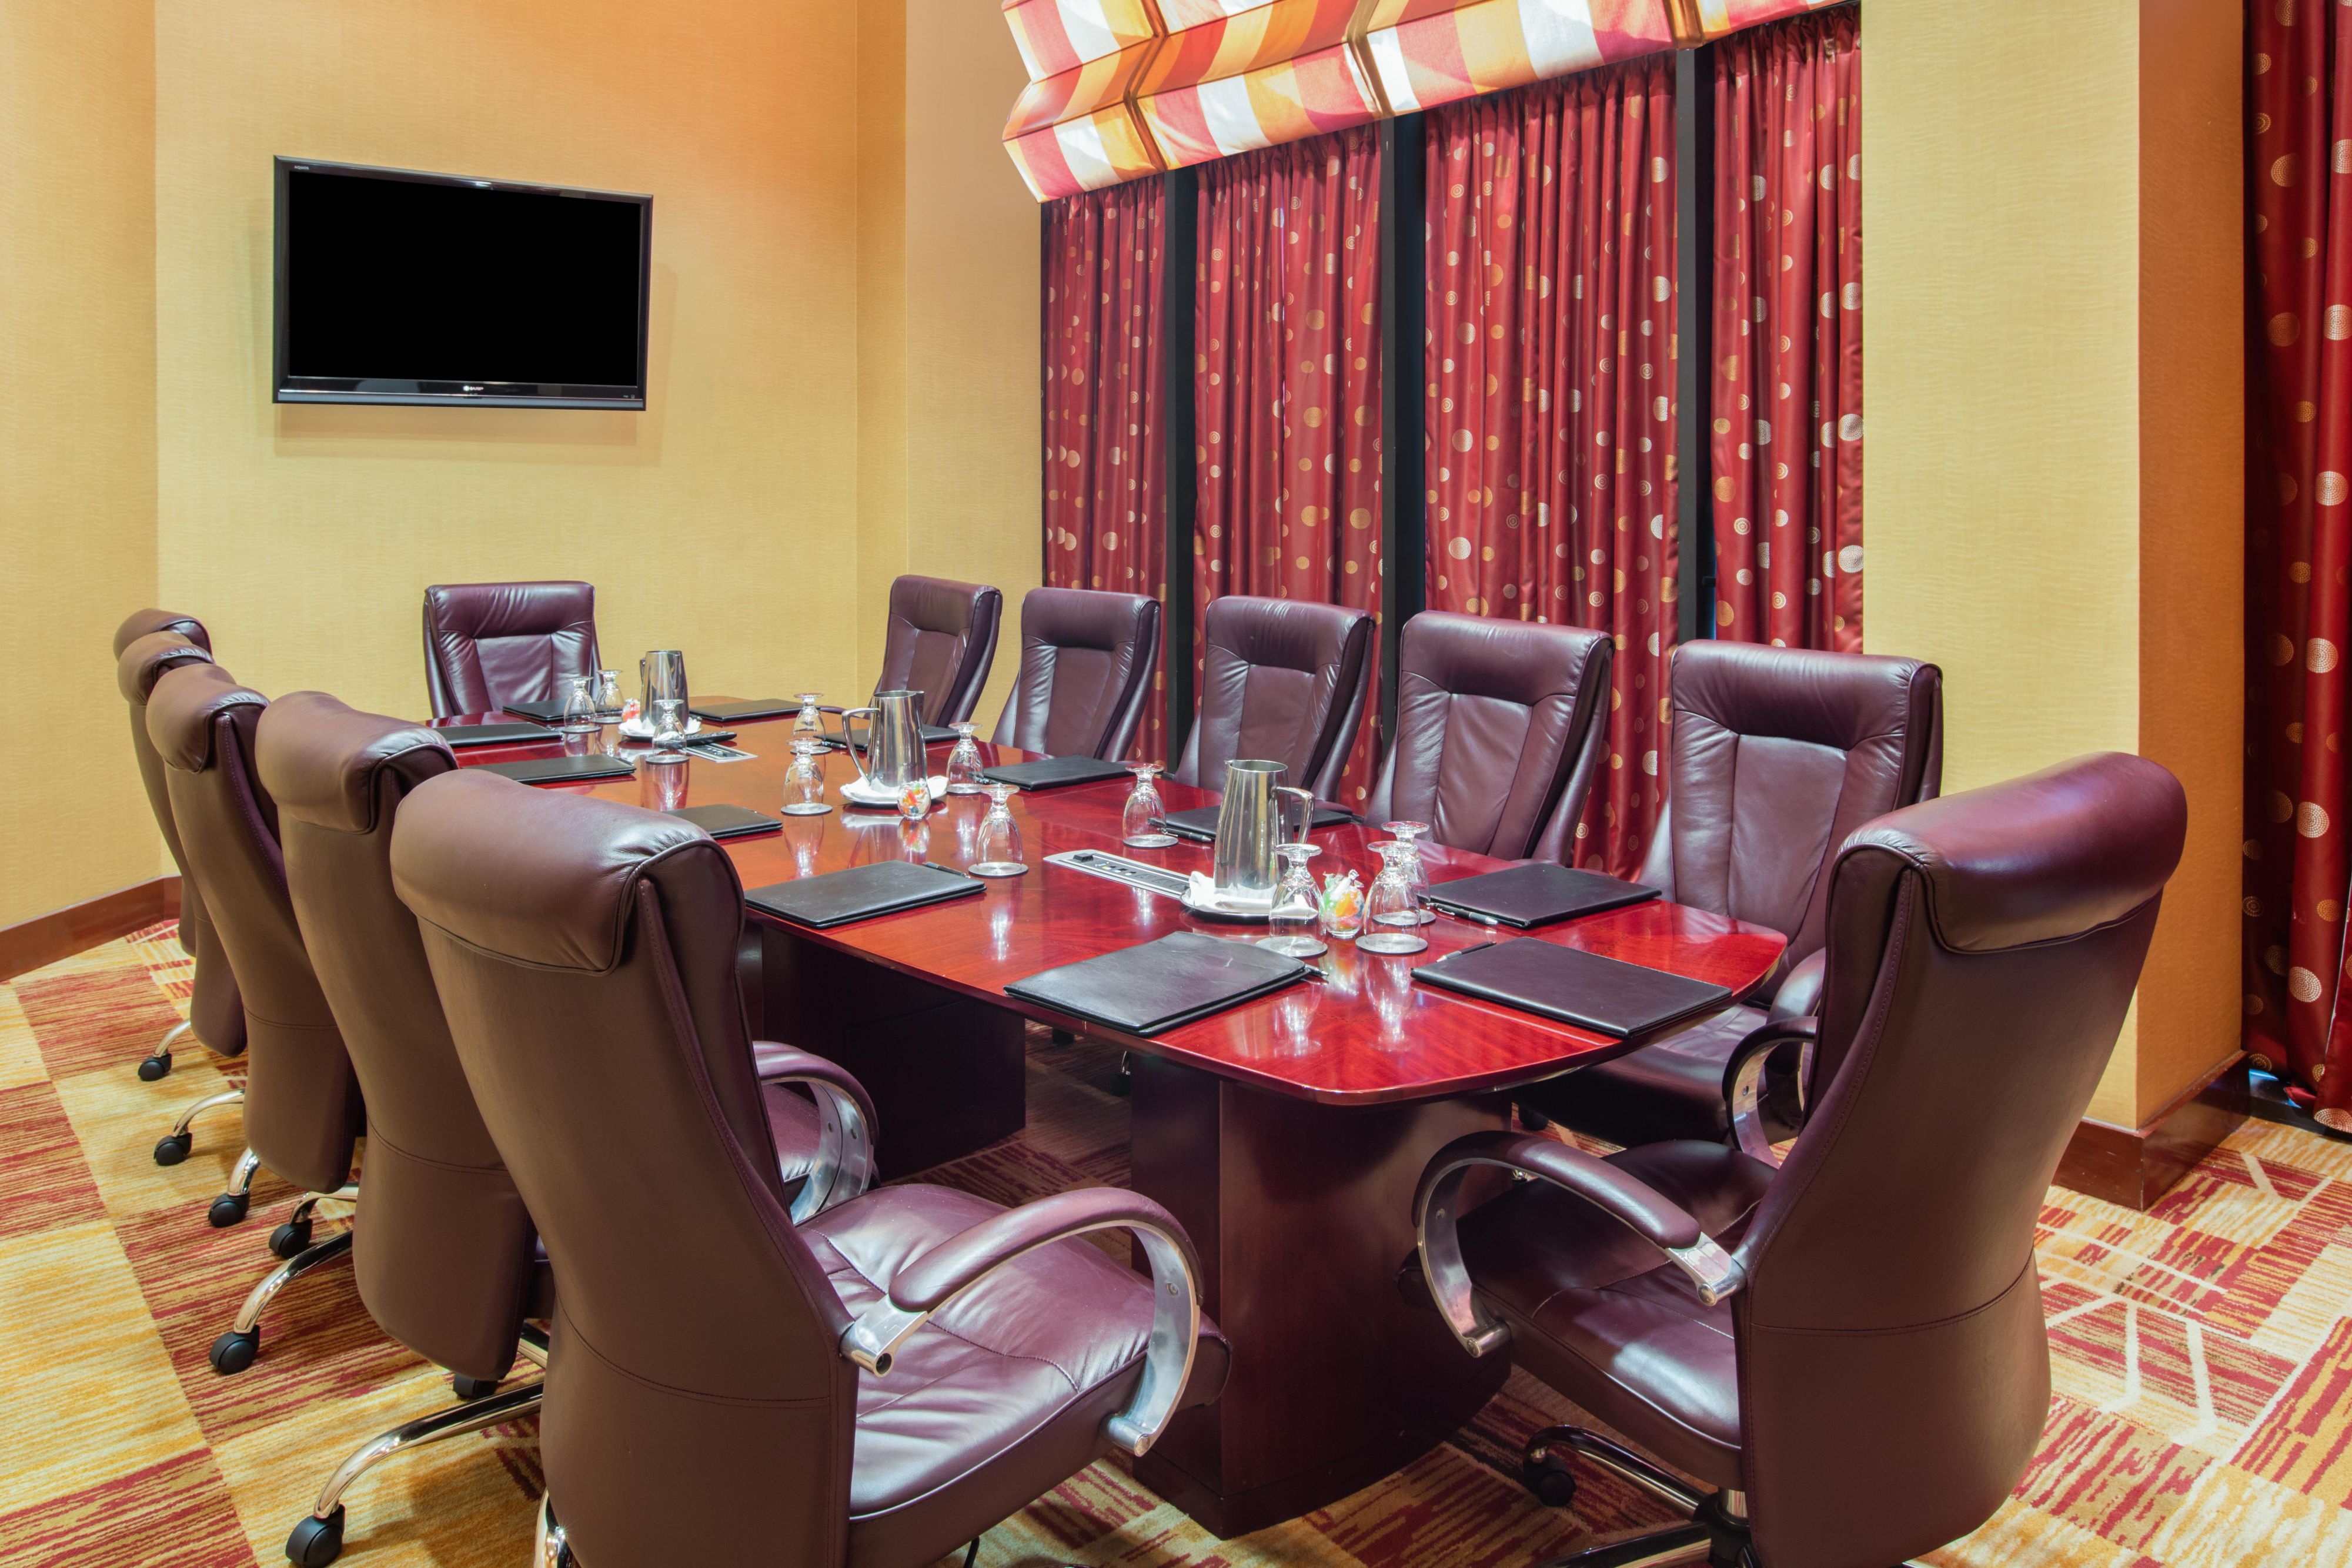 The Executive Boardroom works well for intimate, smaller meetings.